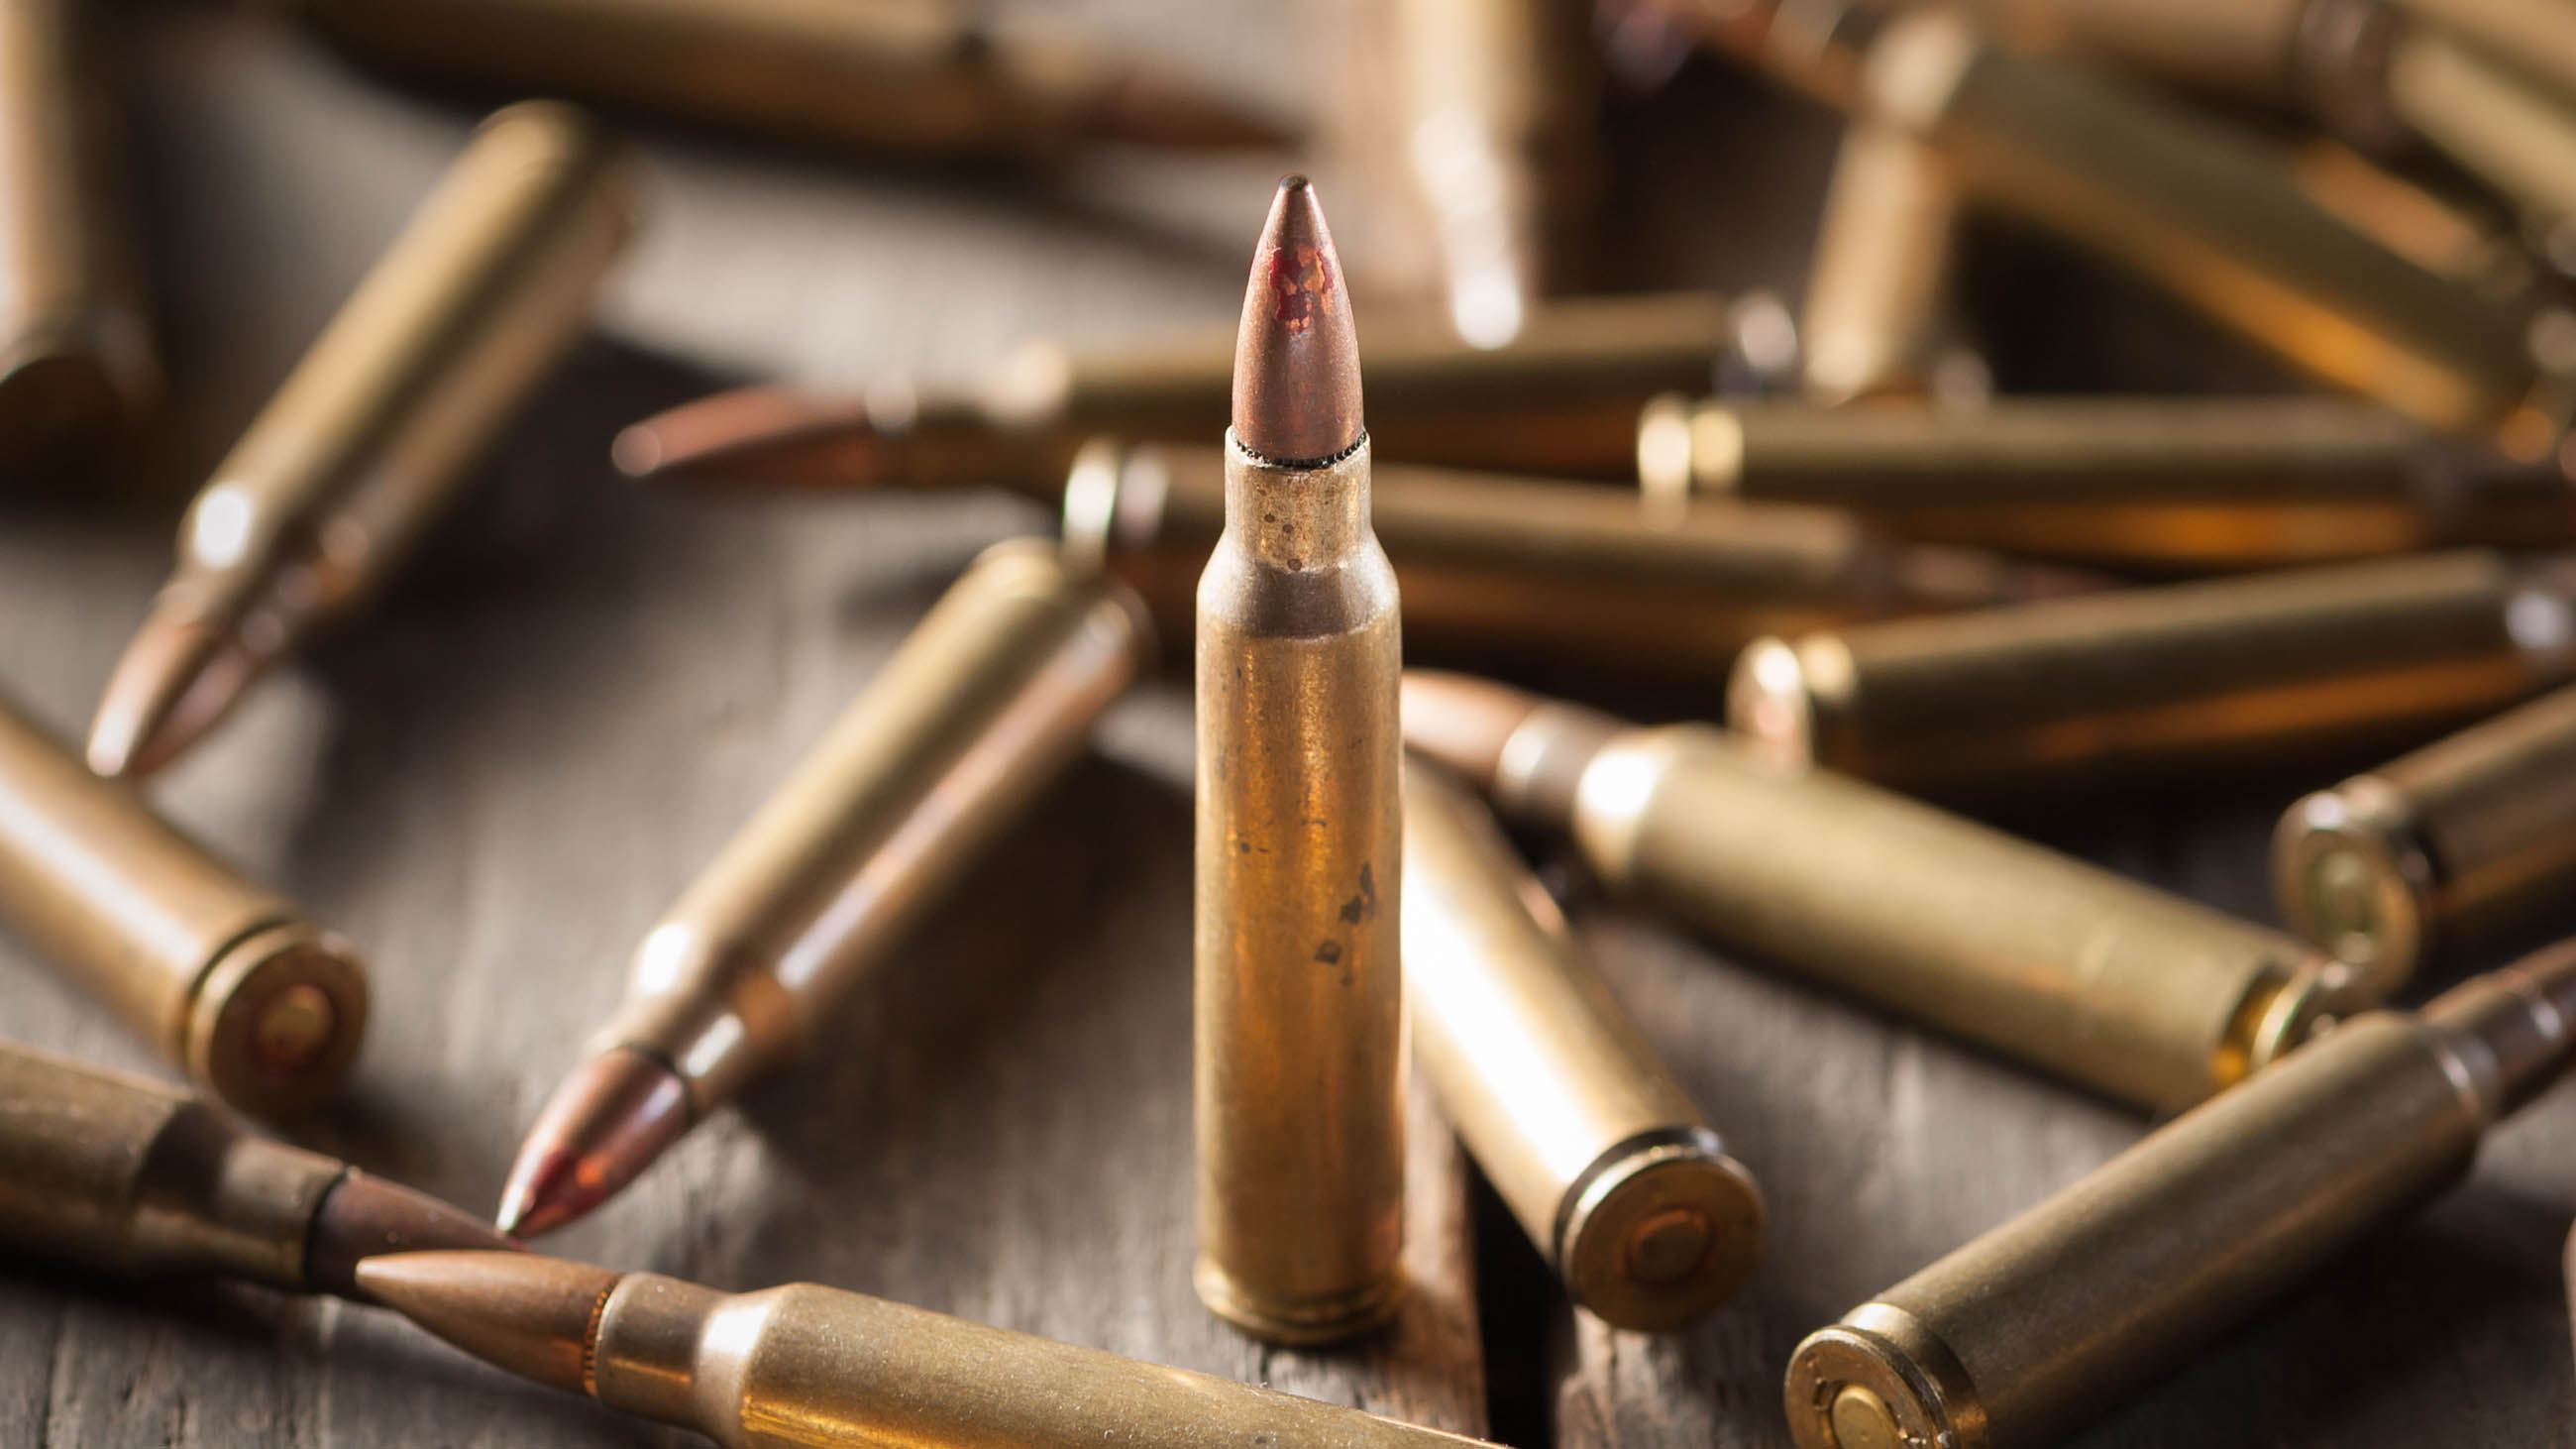 Despite clear evidence that lead ammunition poses real environmental and public health risks, it remains the go-to choice for gun enthusiasts. Why?